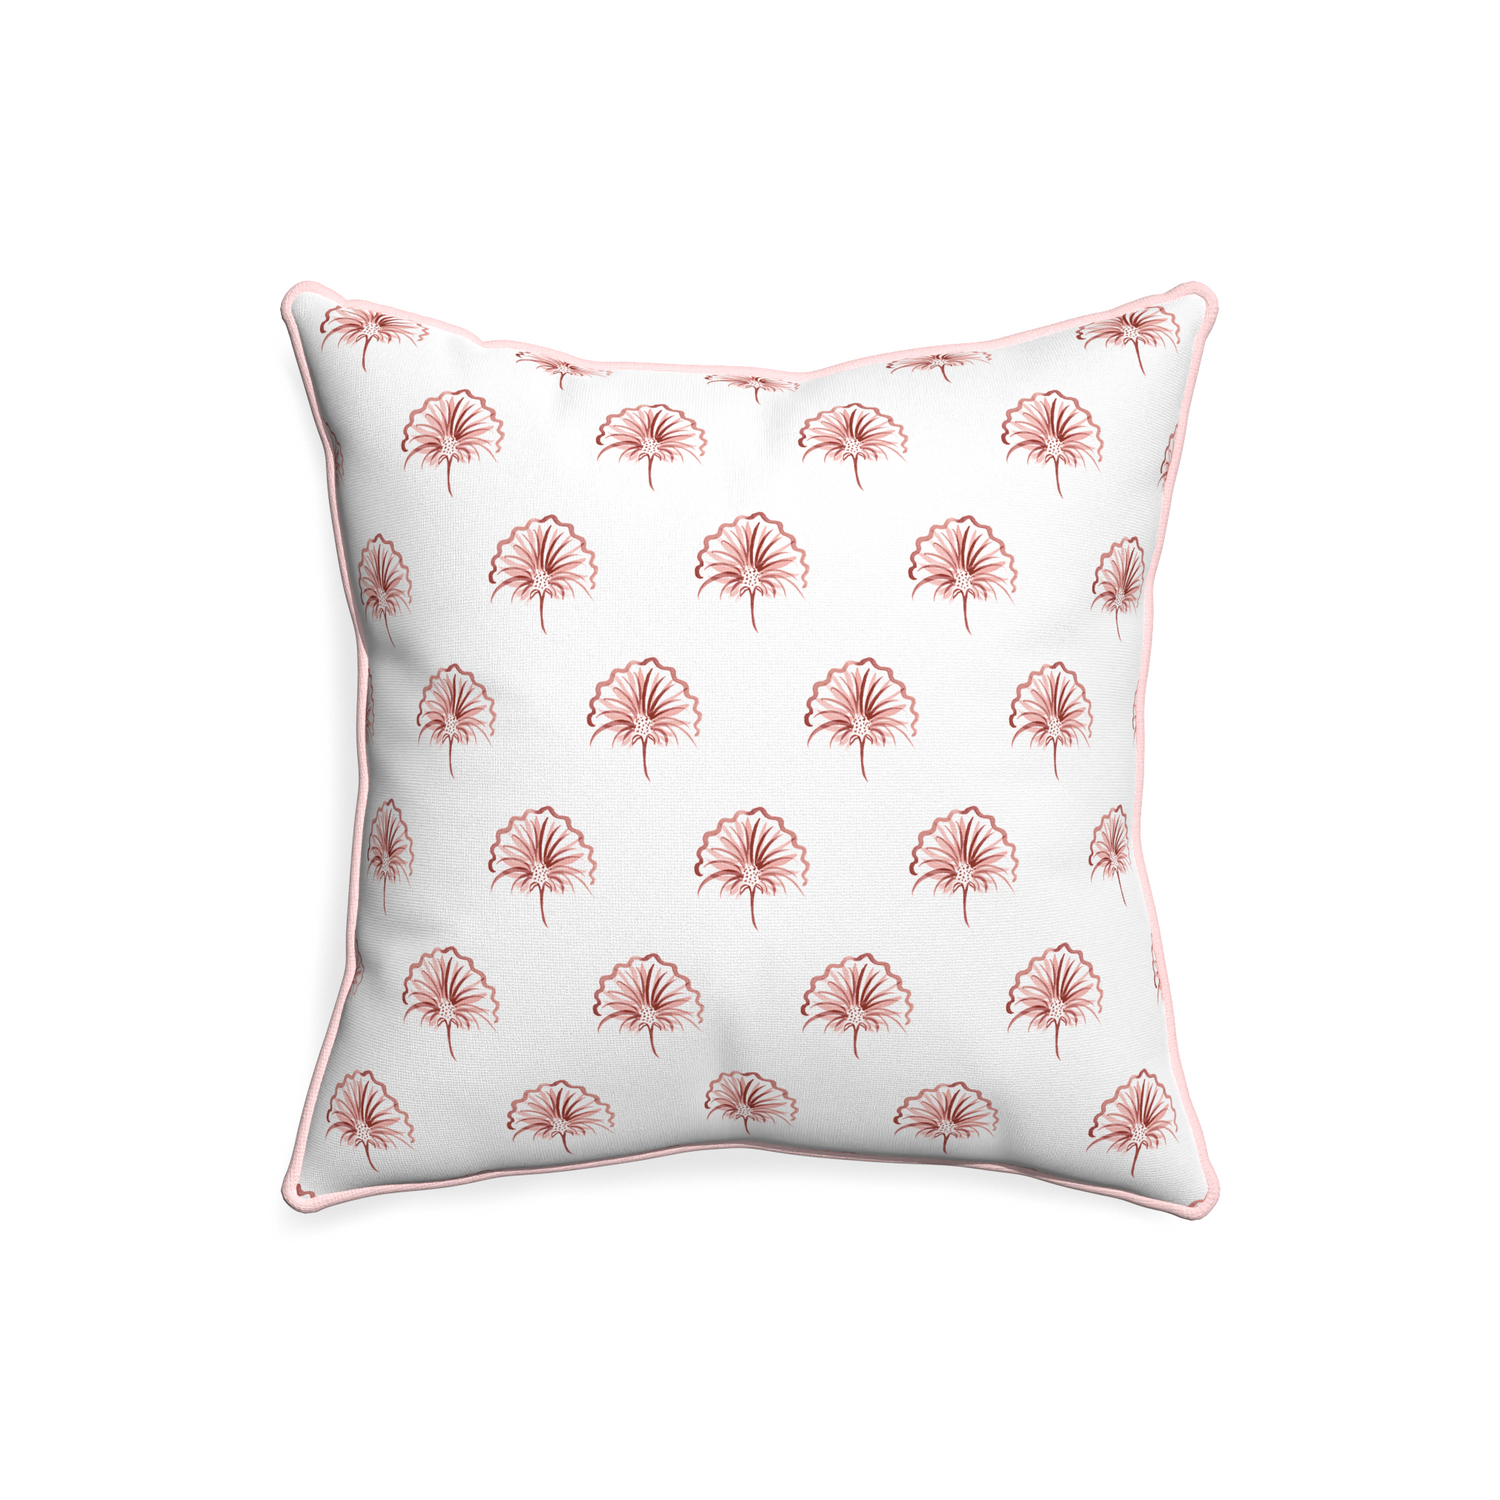 20-square penelope rose custom floral pinkpillow with petal piping on white background